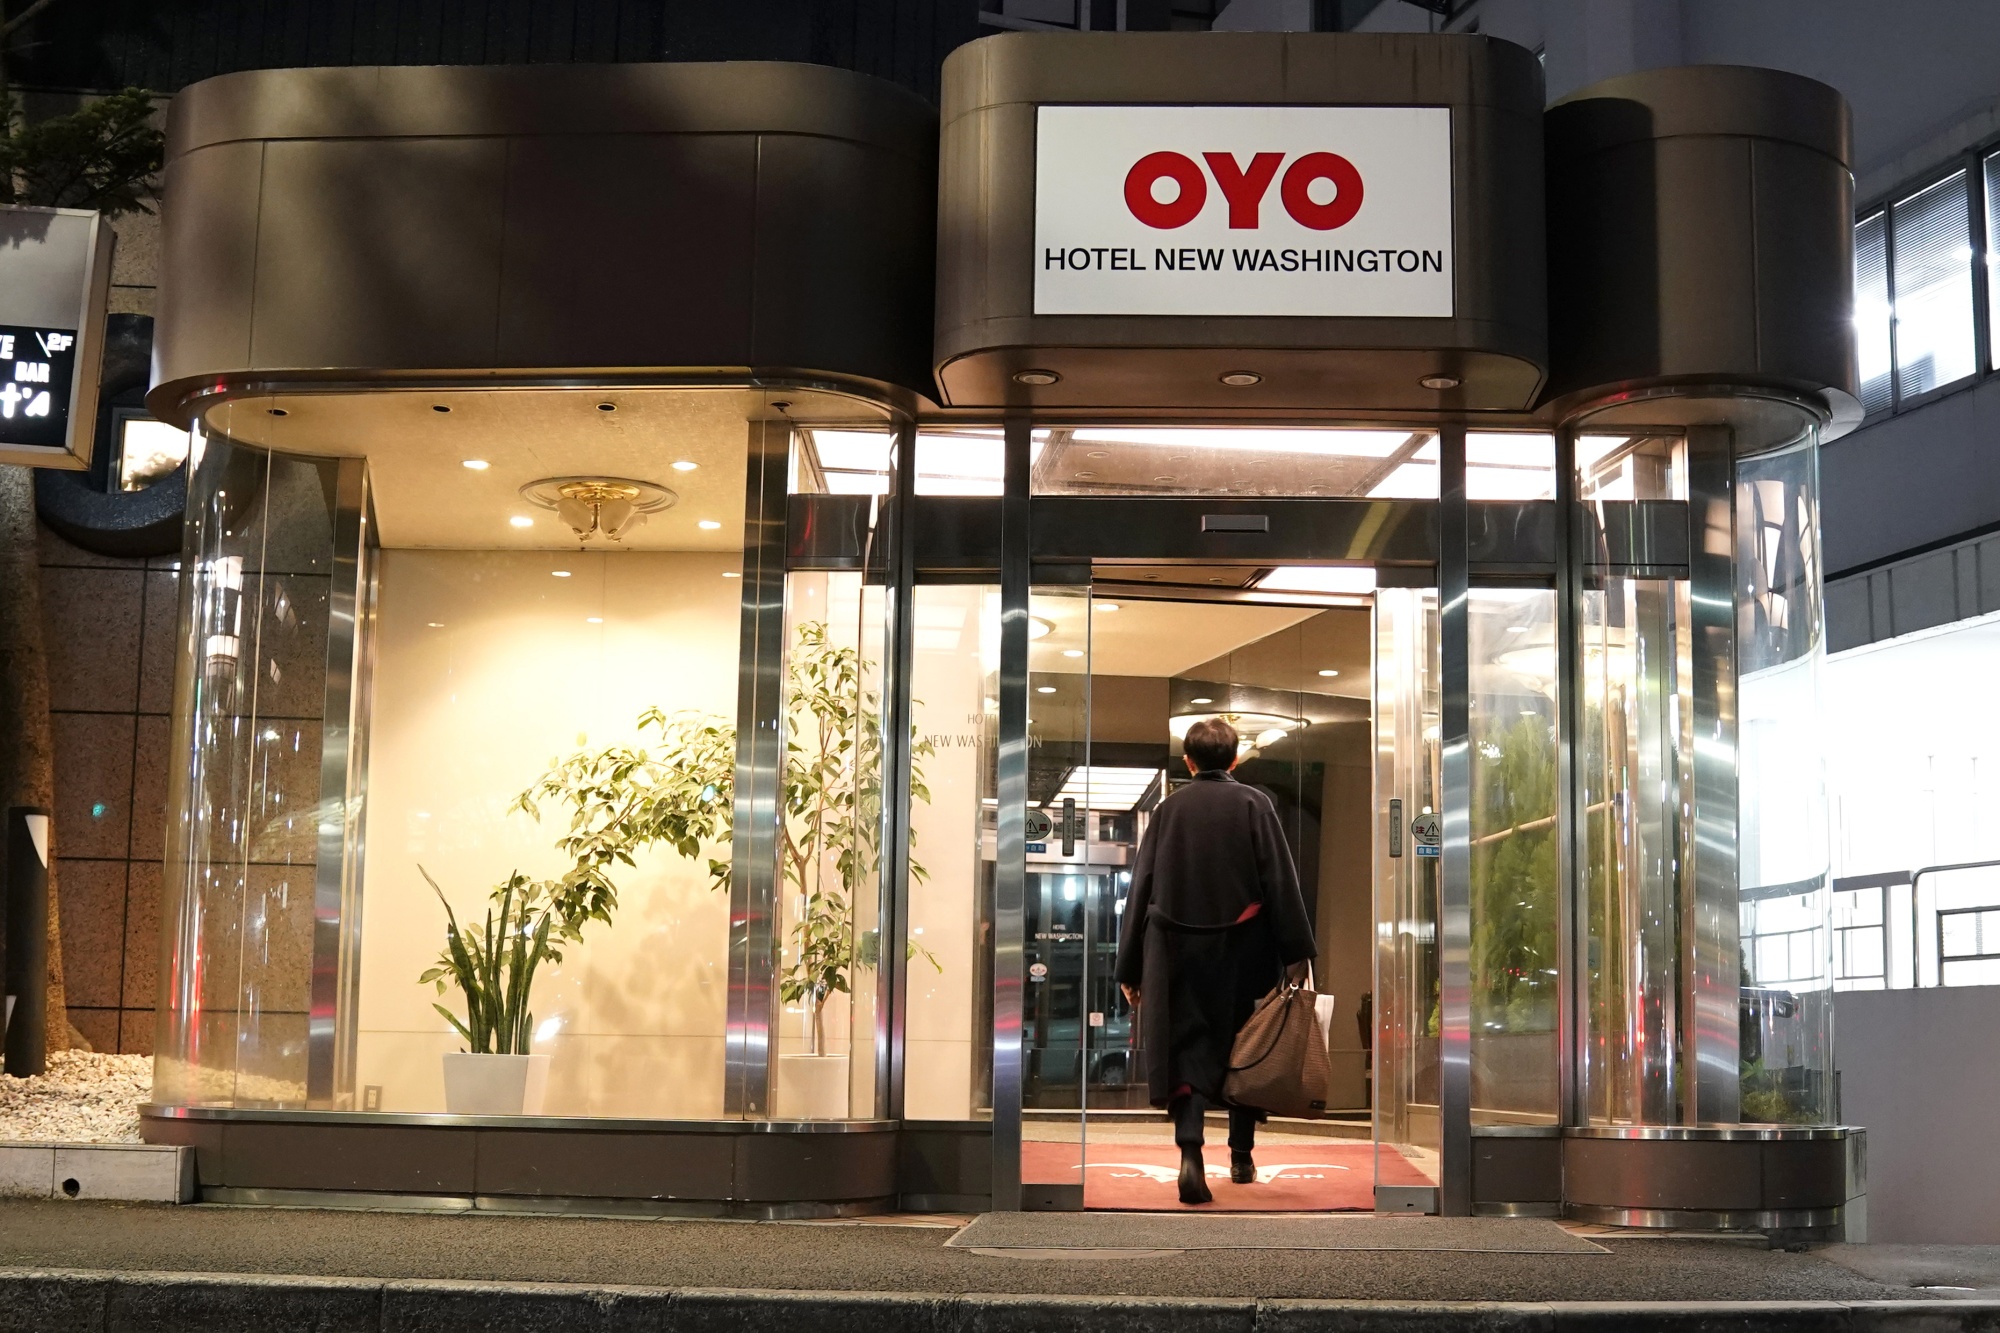 A hotel operated by Oyo Hotels Japan in Tokyo.